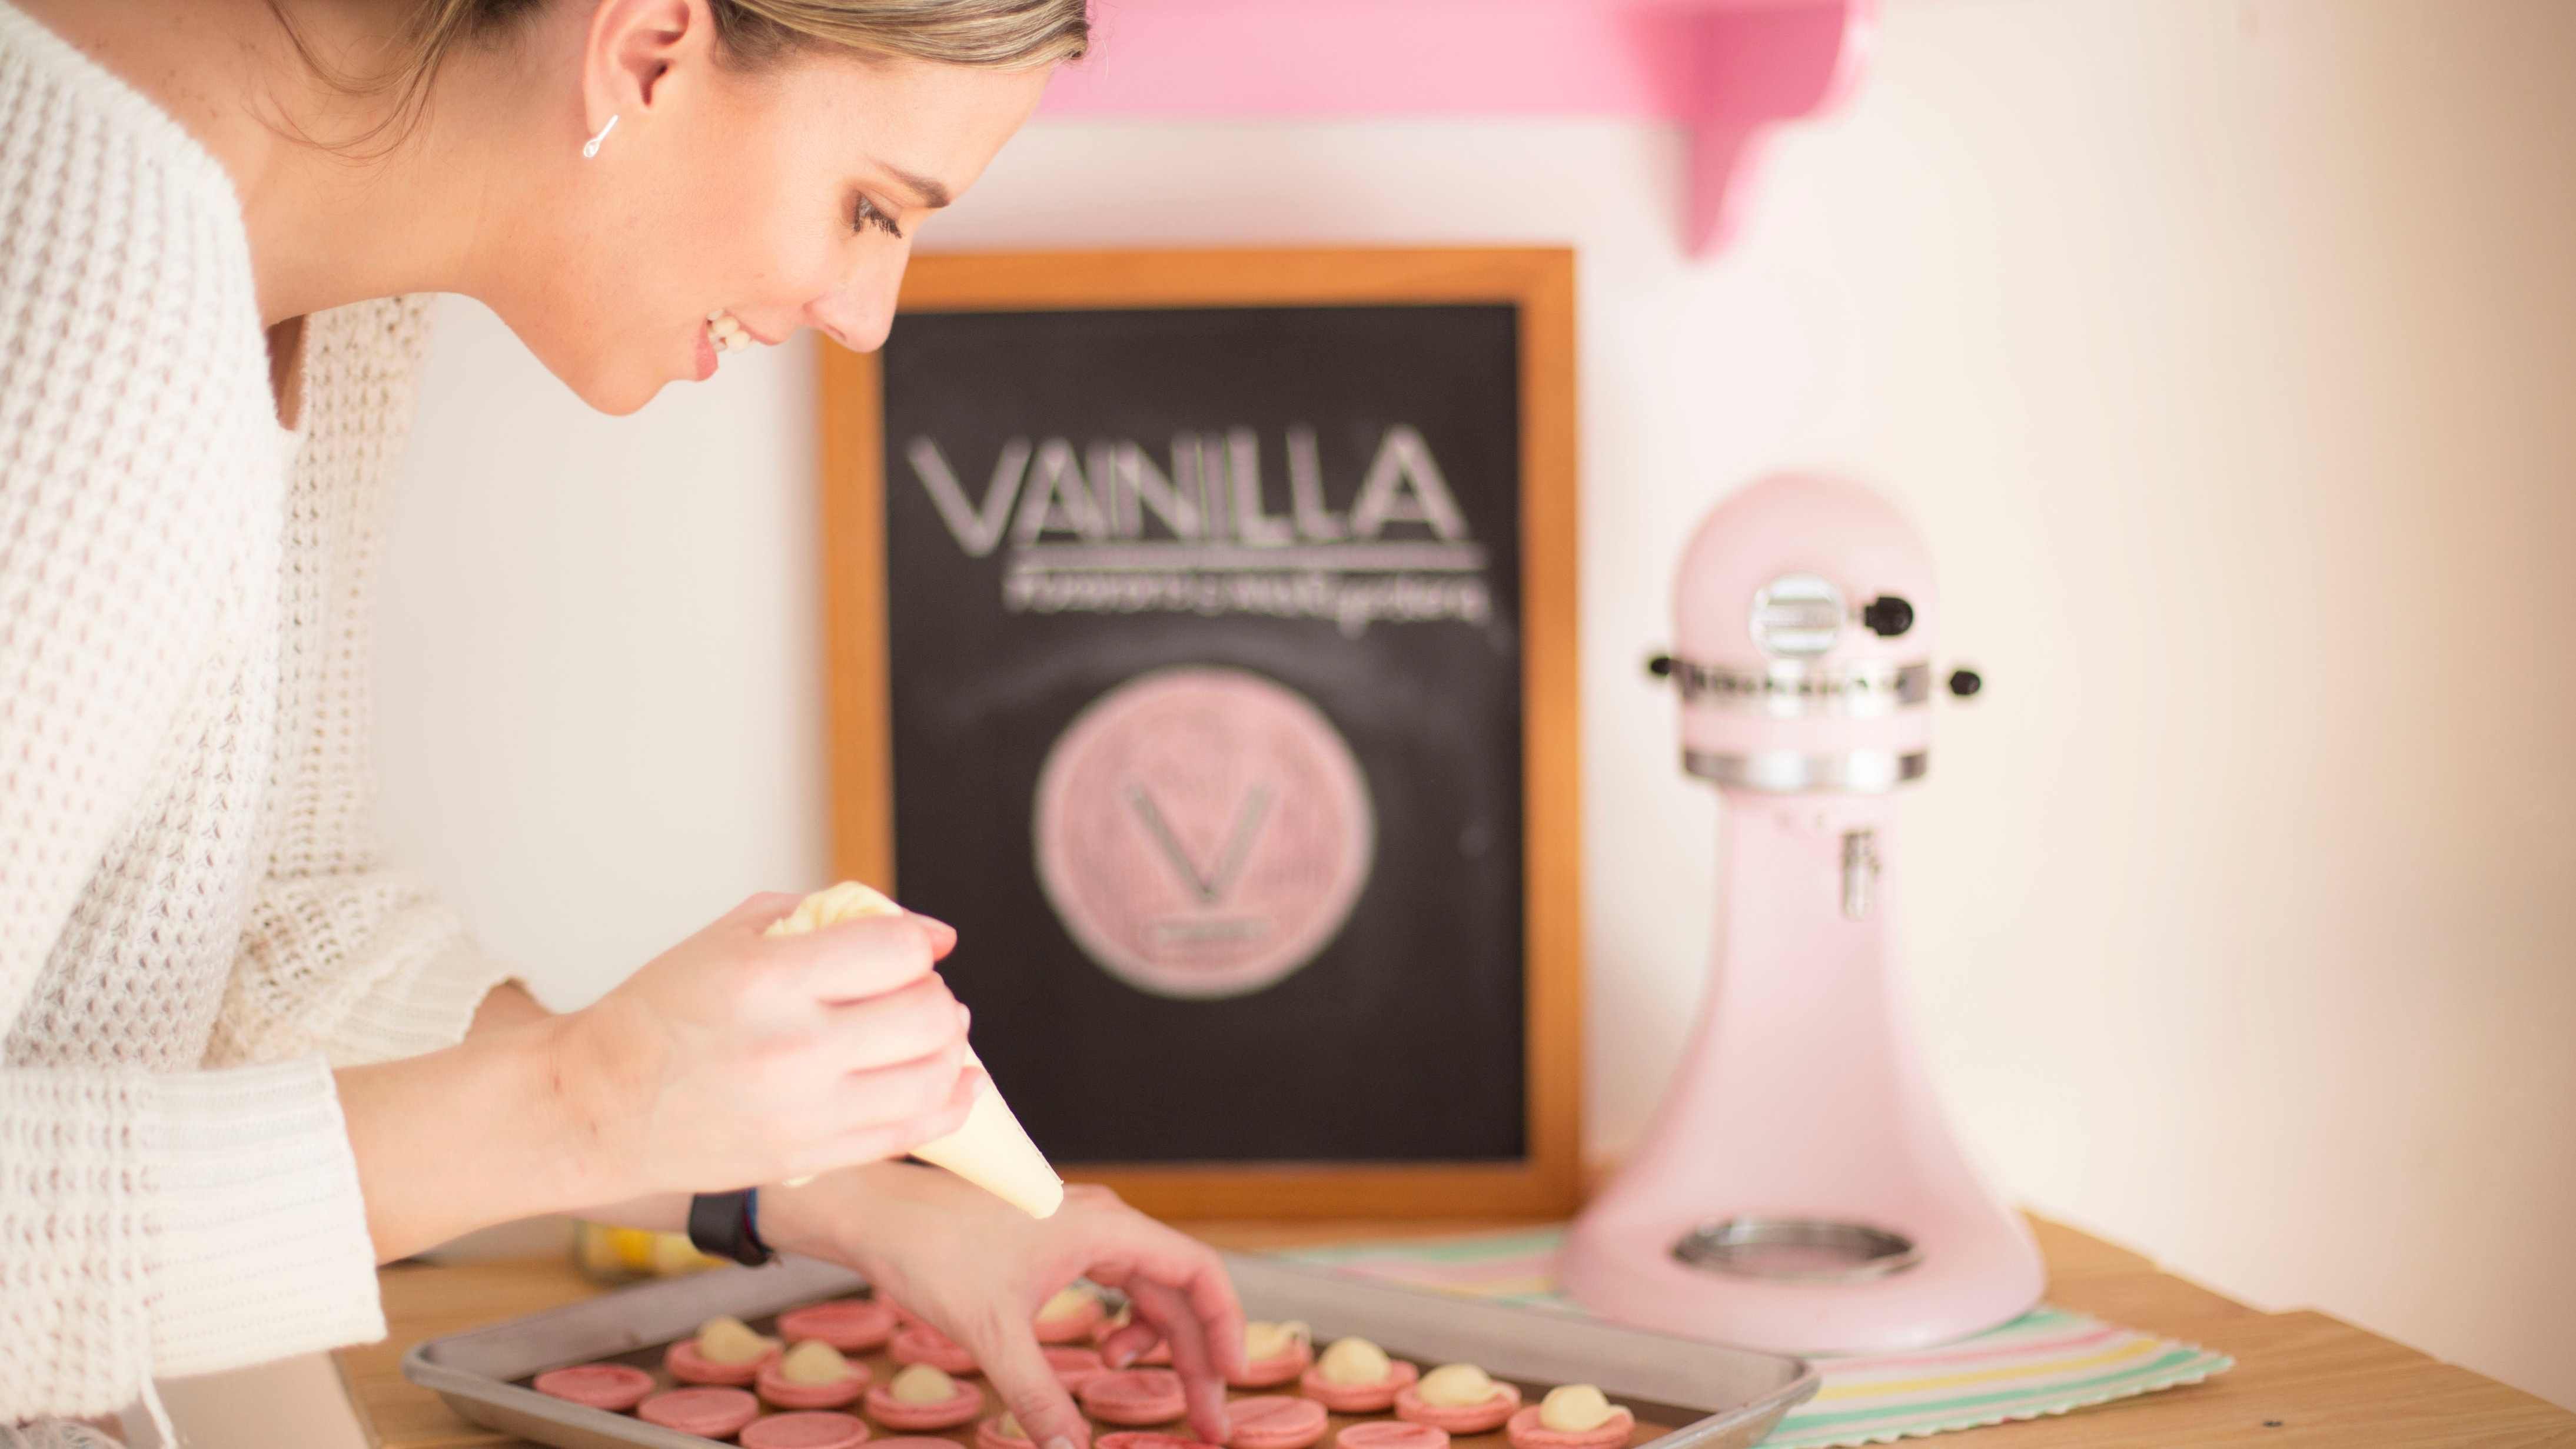 How Mafer Became a Pastry Chef on Instagram & #IRL